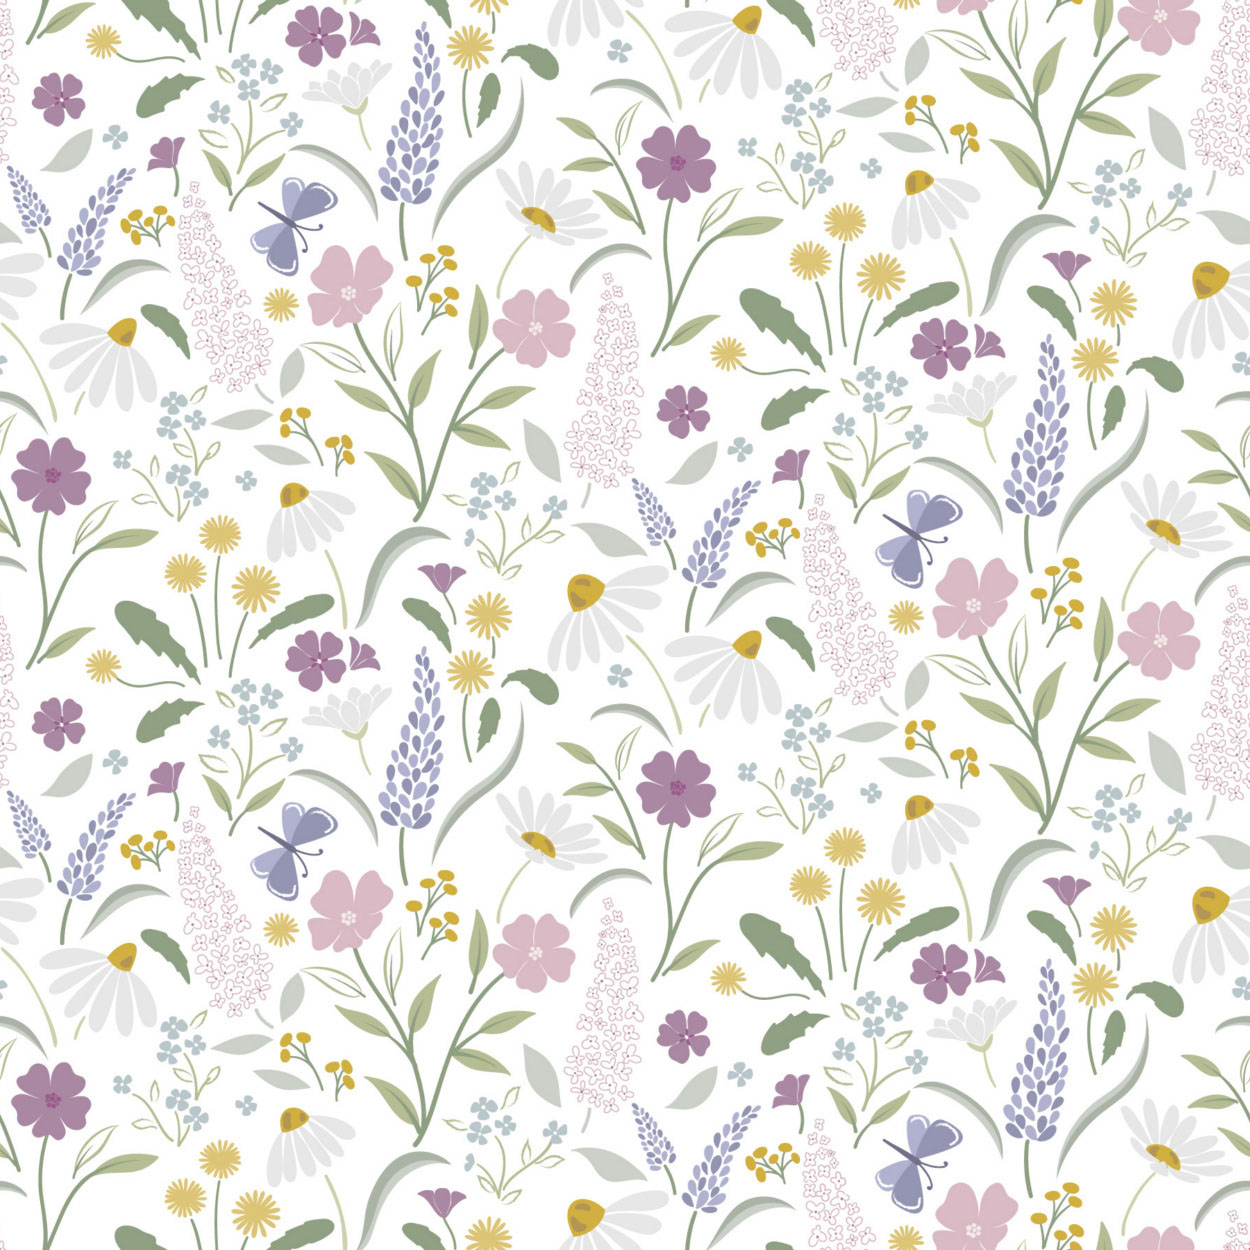 Floral Song By Cassandra Connolly For Lewis & Irene - Bloom White